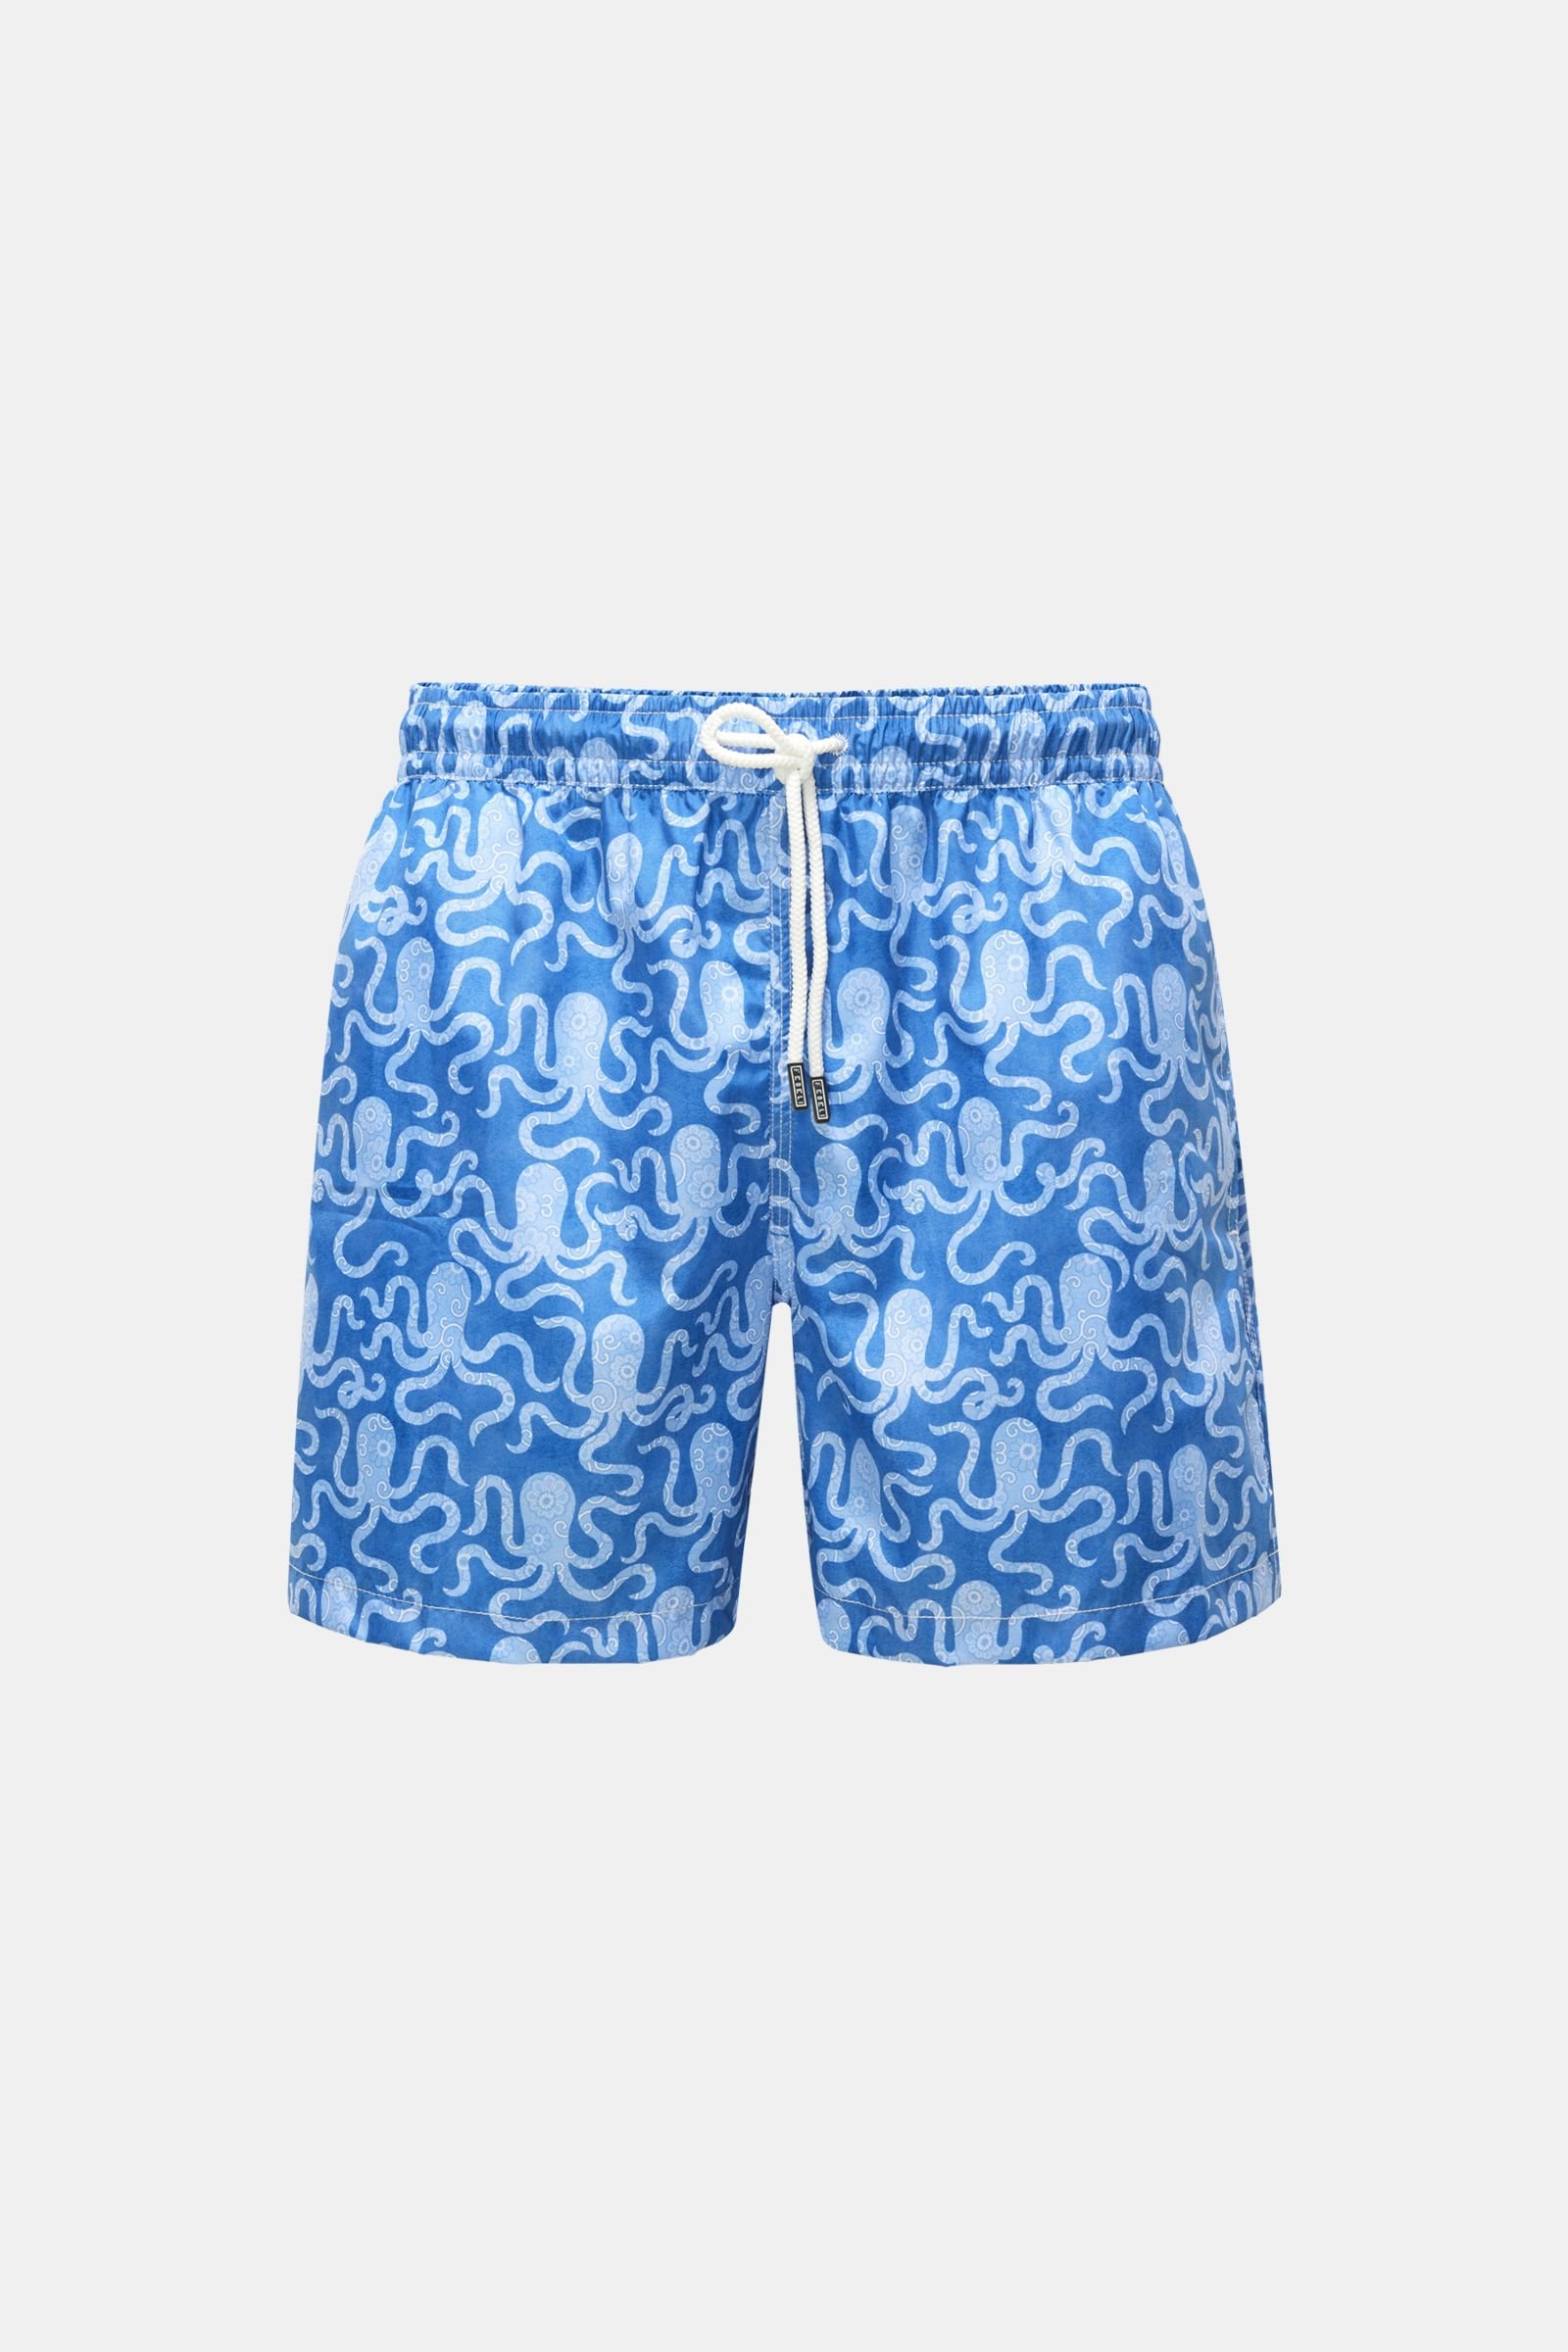 Swim shorts 'Madeira Airstop' blue/smoky blue patterned